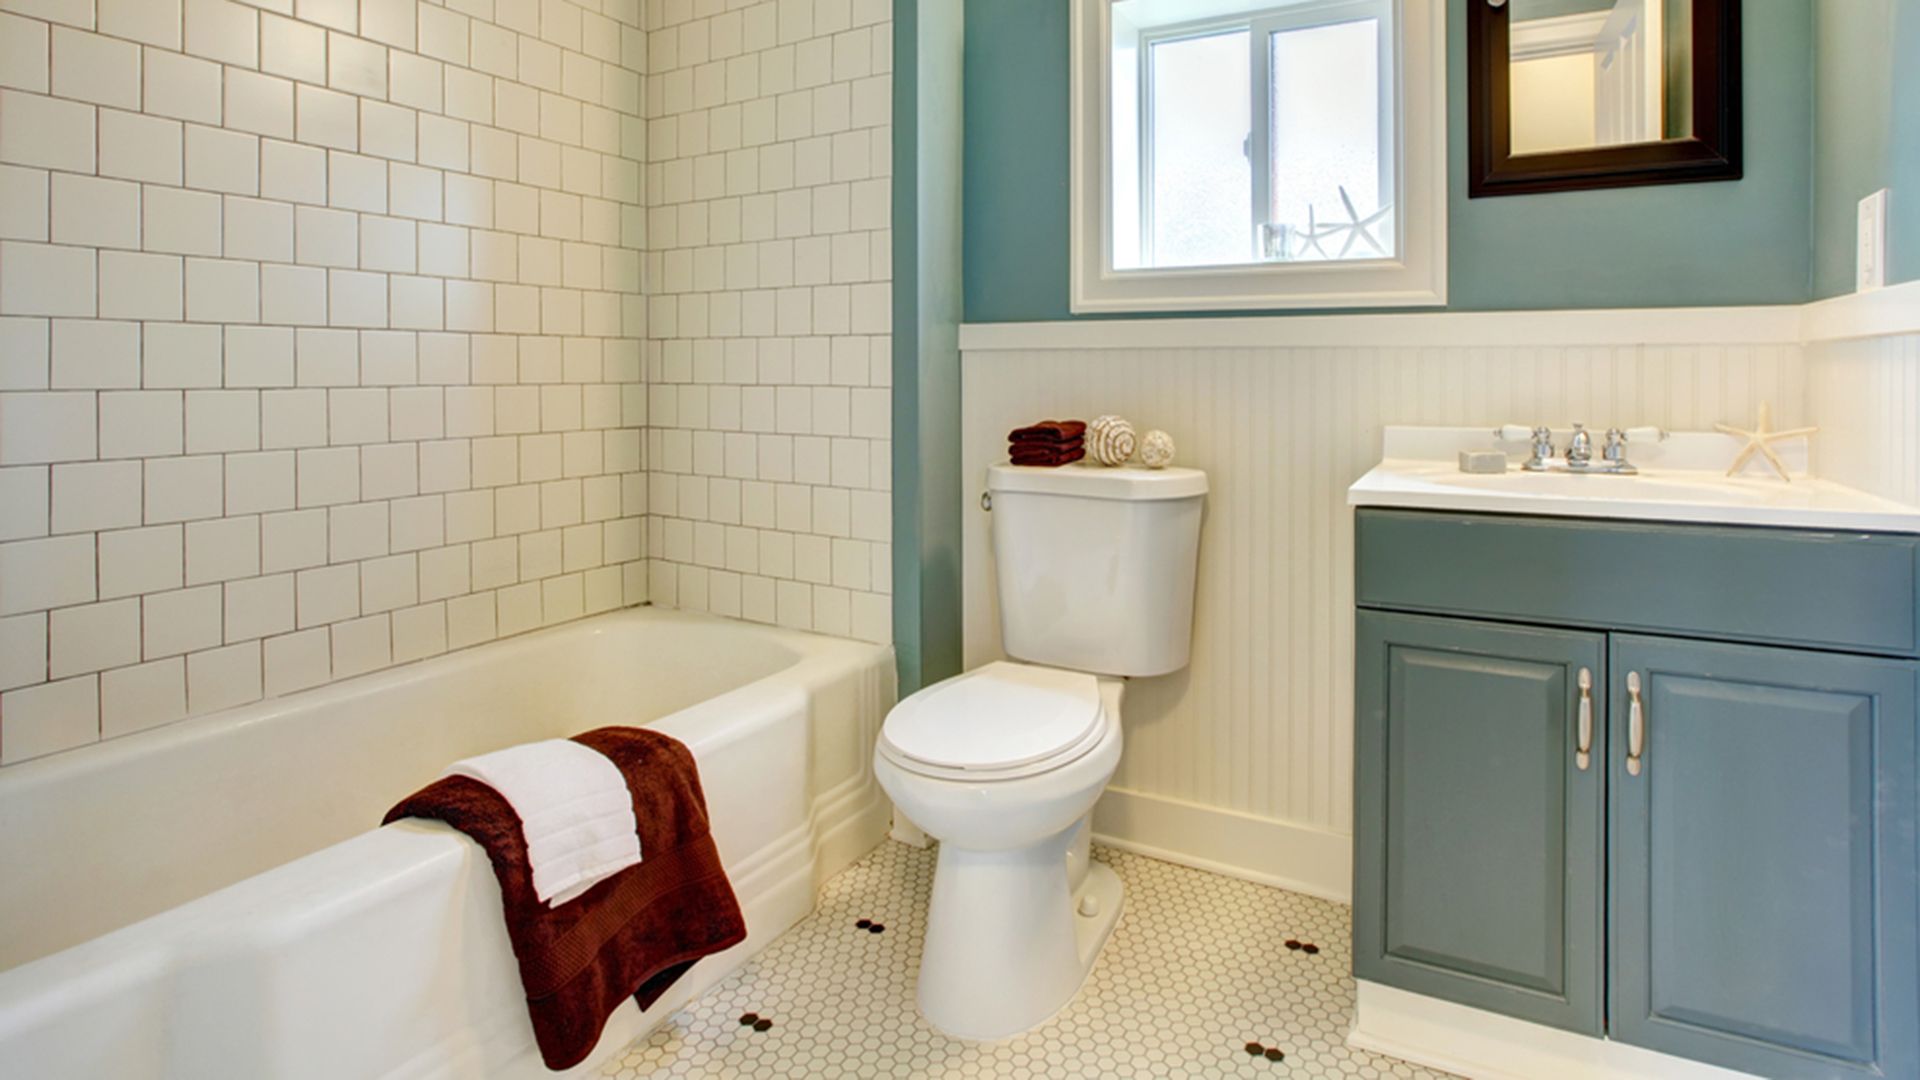 Classic simple blue bathroom with white tile.; Shutterstock ID 95931778; PO: MC for TODAY